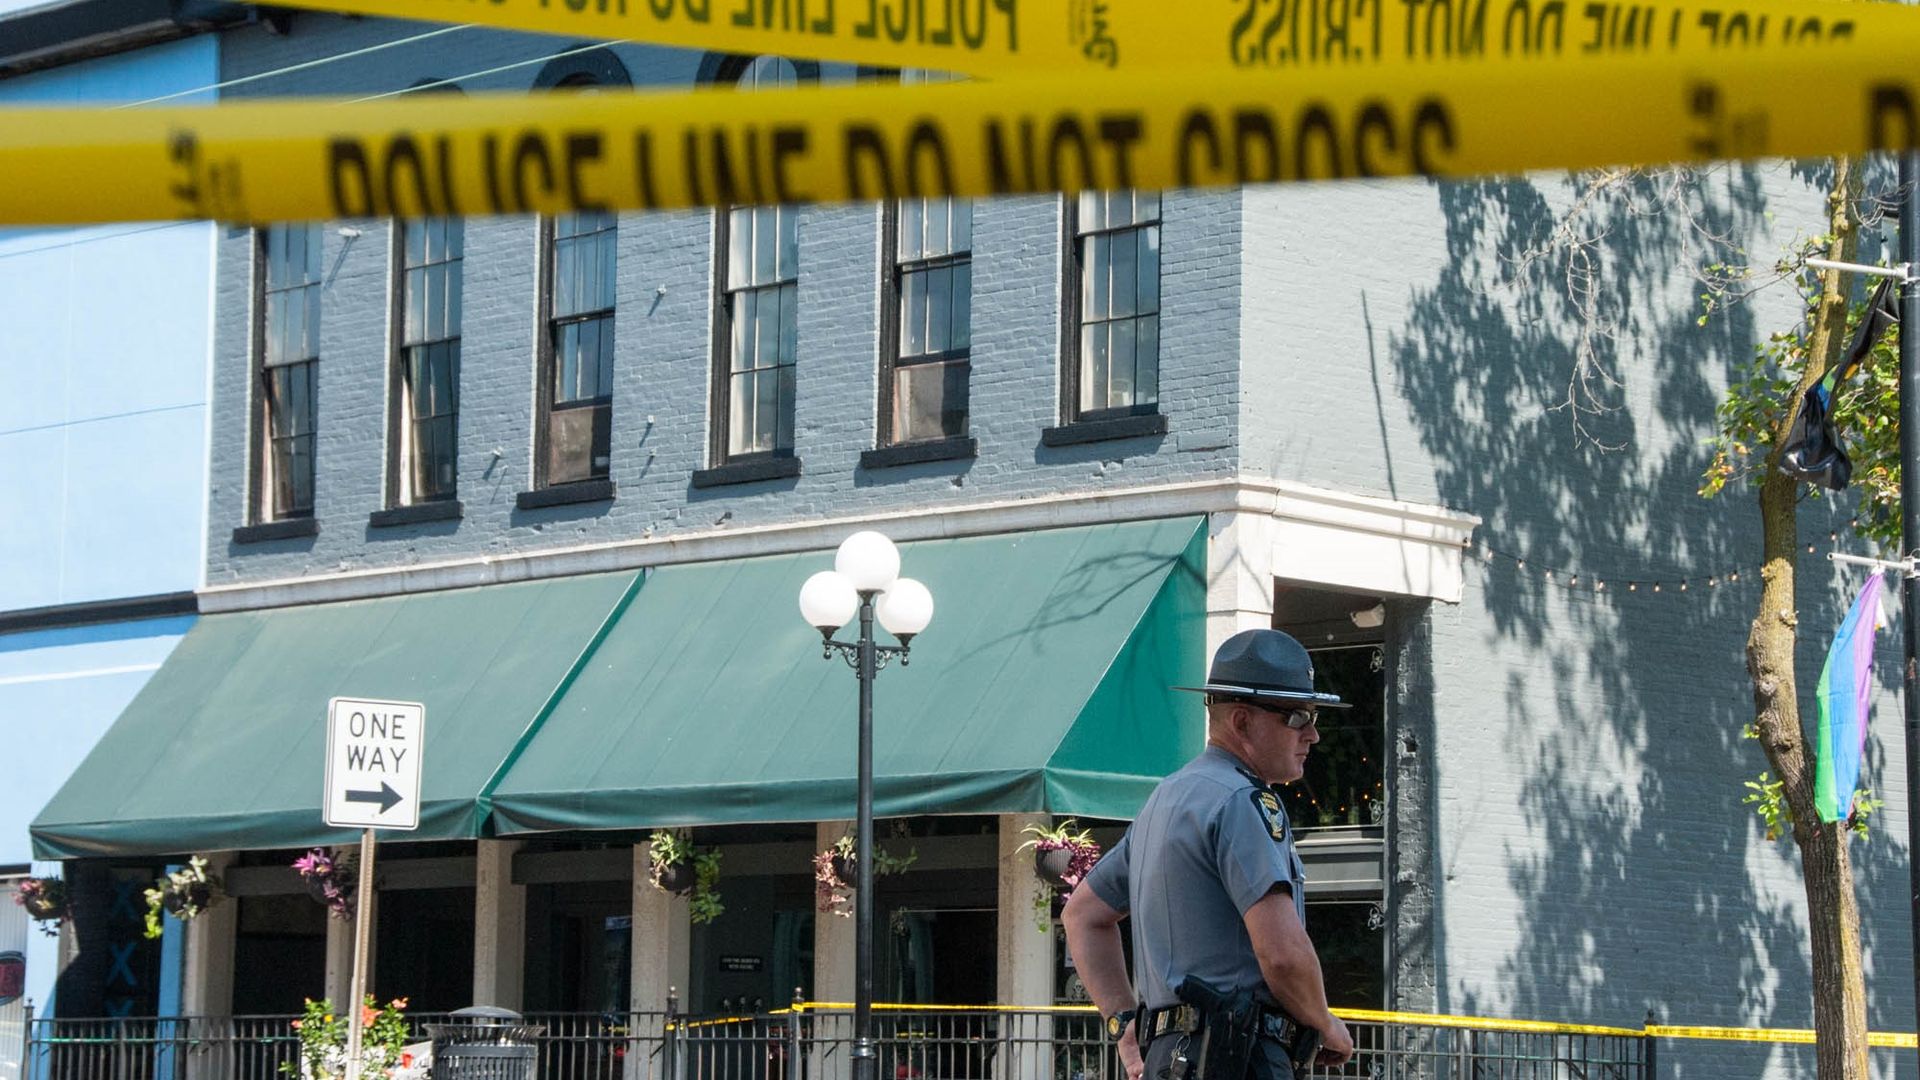 Police officials cordon off the scene after a gunman opened fire on a crowd in Dayton, Ohio, United States on August 4, 2019.